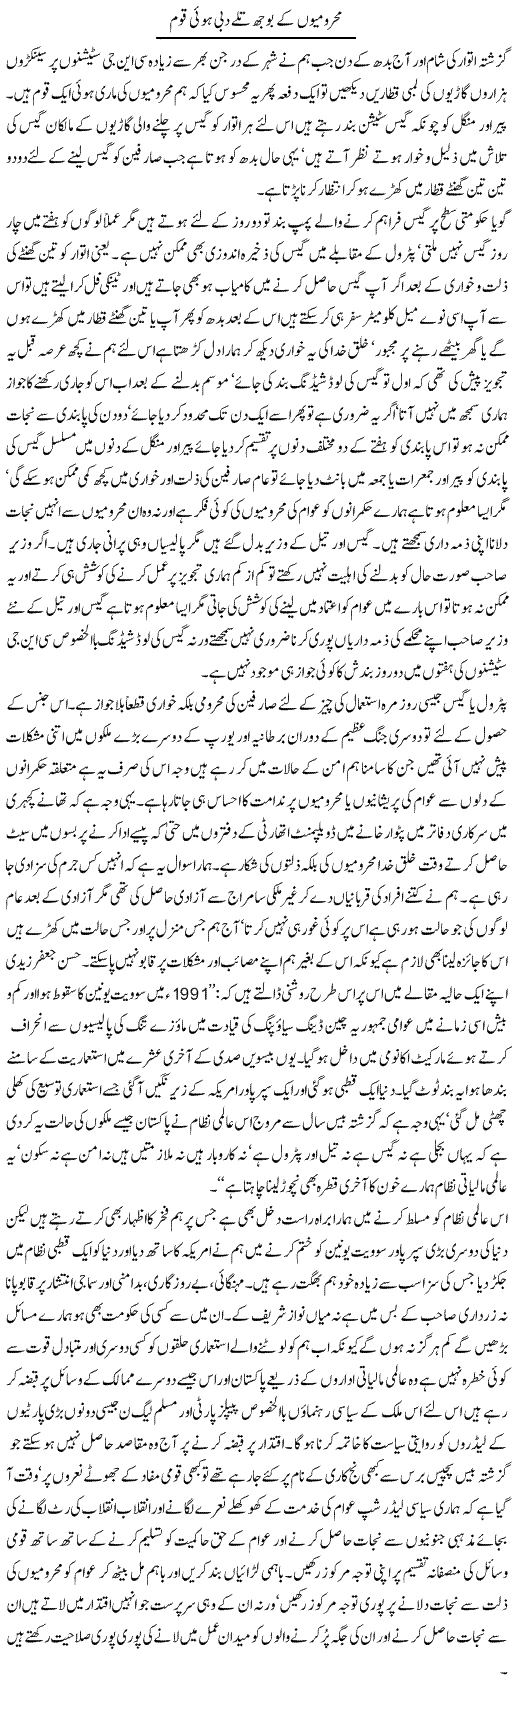 The Nation In Problems Express Column Hameed Akhtar 31 March 2011